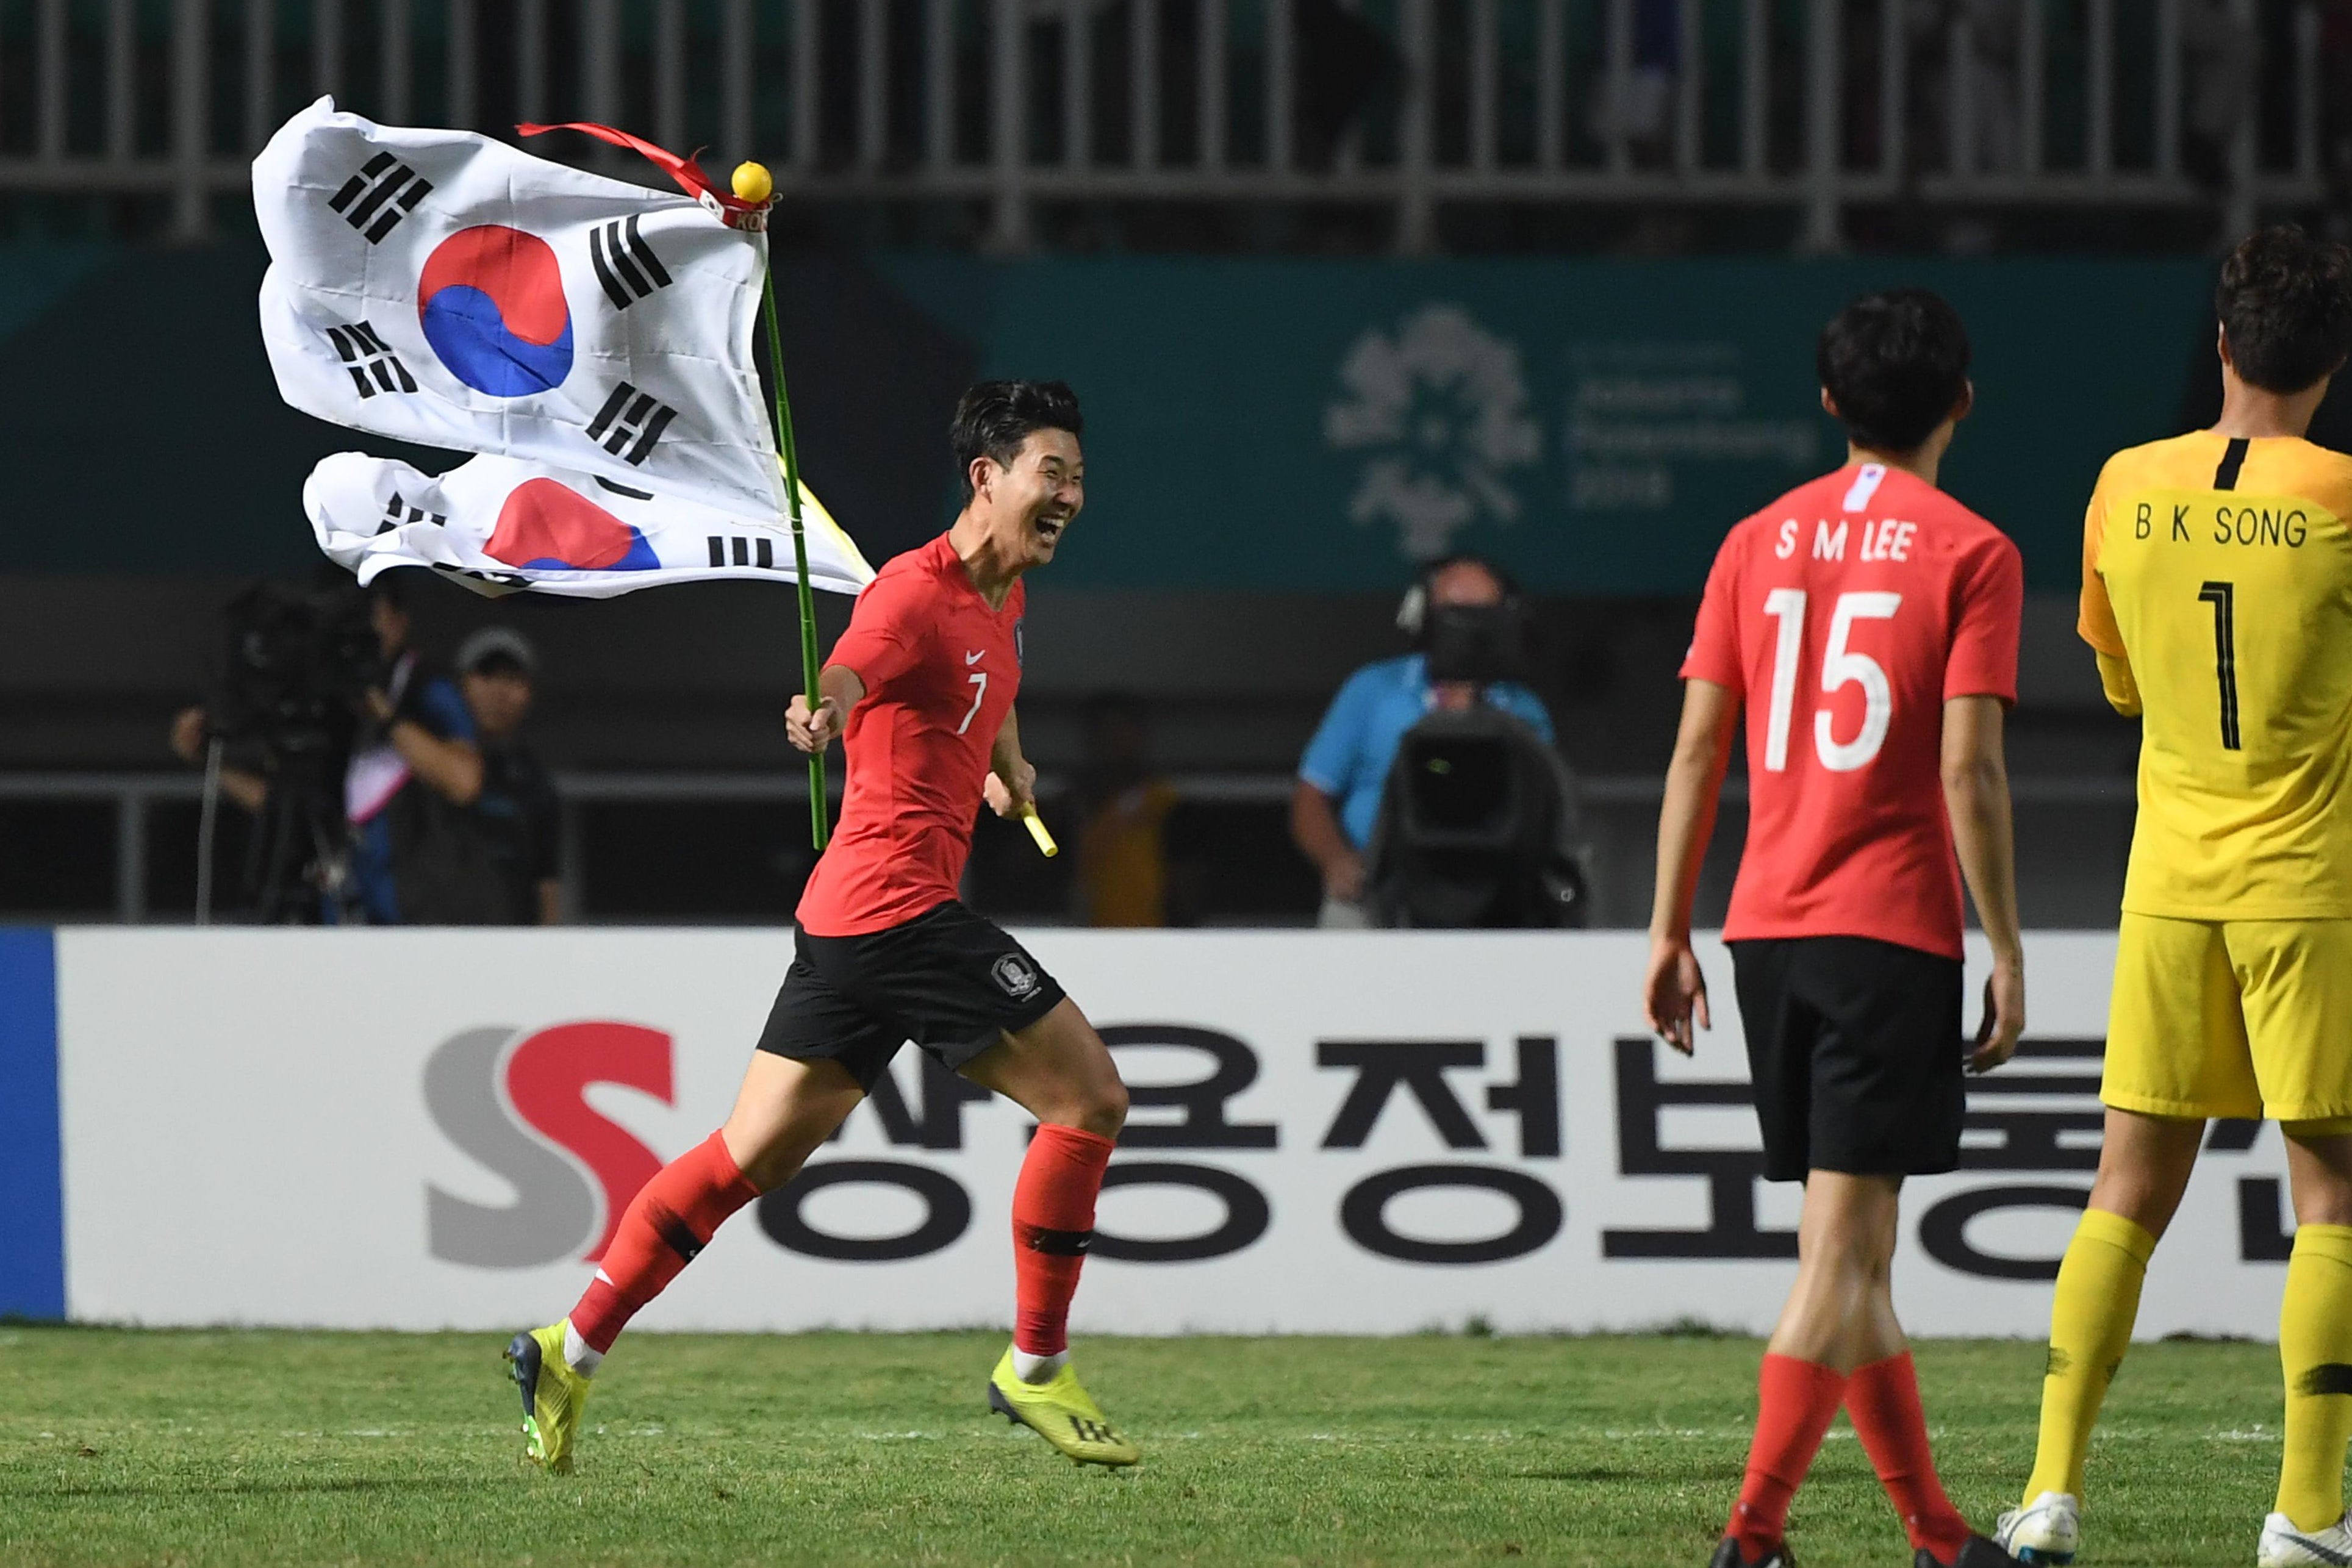 South Korea's Heung Min Son celebrates after winning against Japan in the men's gold medal football match at the 2018 Asian Games in Bogor on September 1, 2018. (Photo by Arief Bagus / AFP)        (Photo credit should read ARIEF BAGUS/AFP/Getty Images)